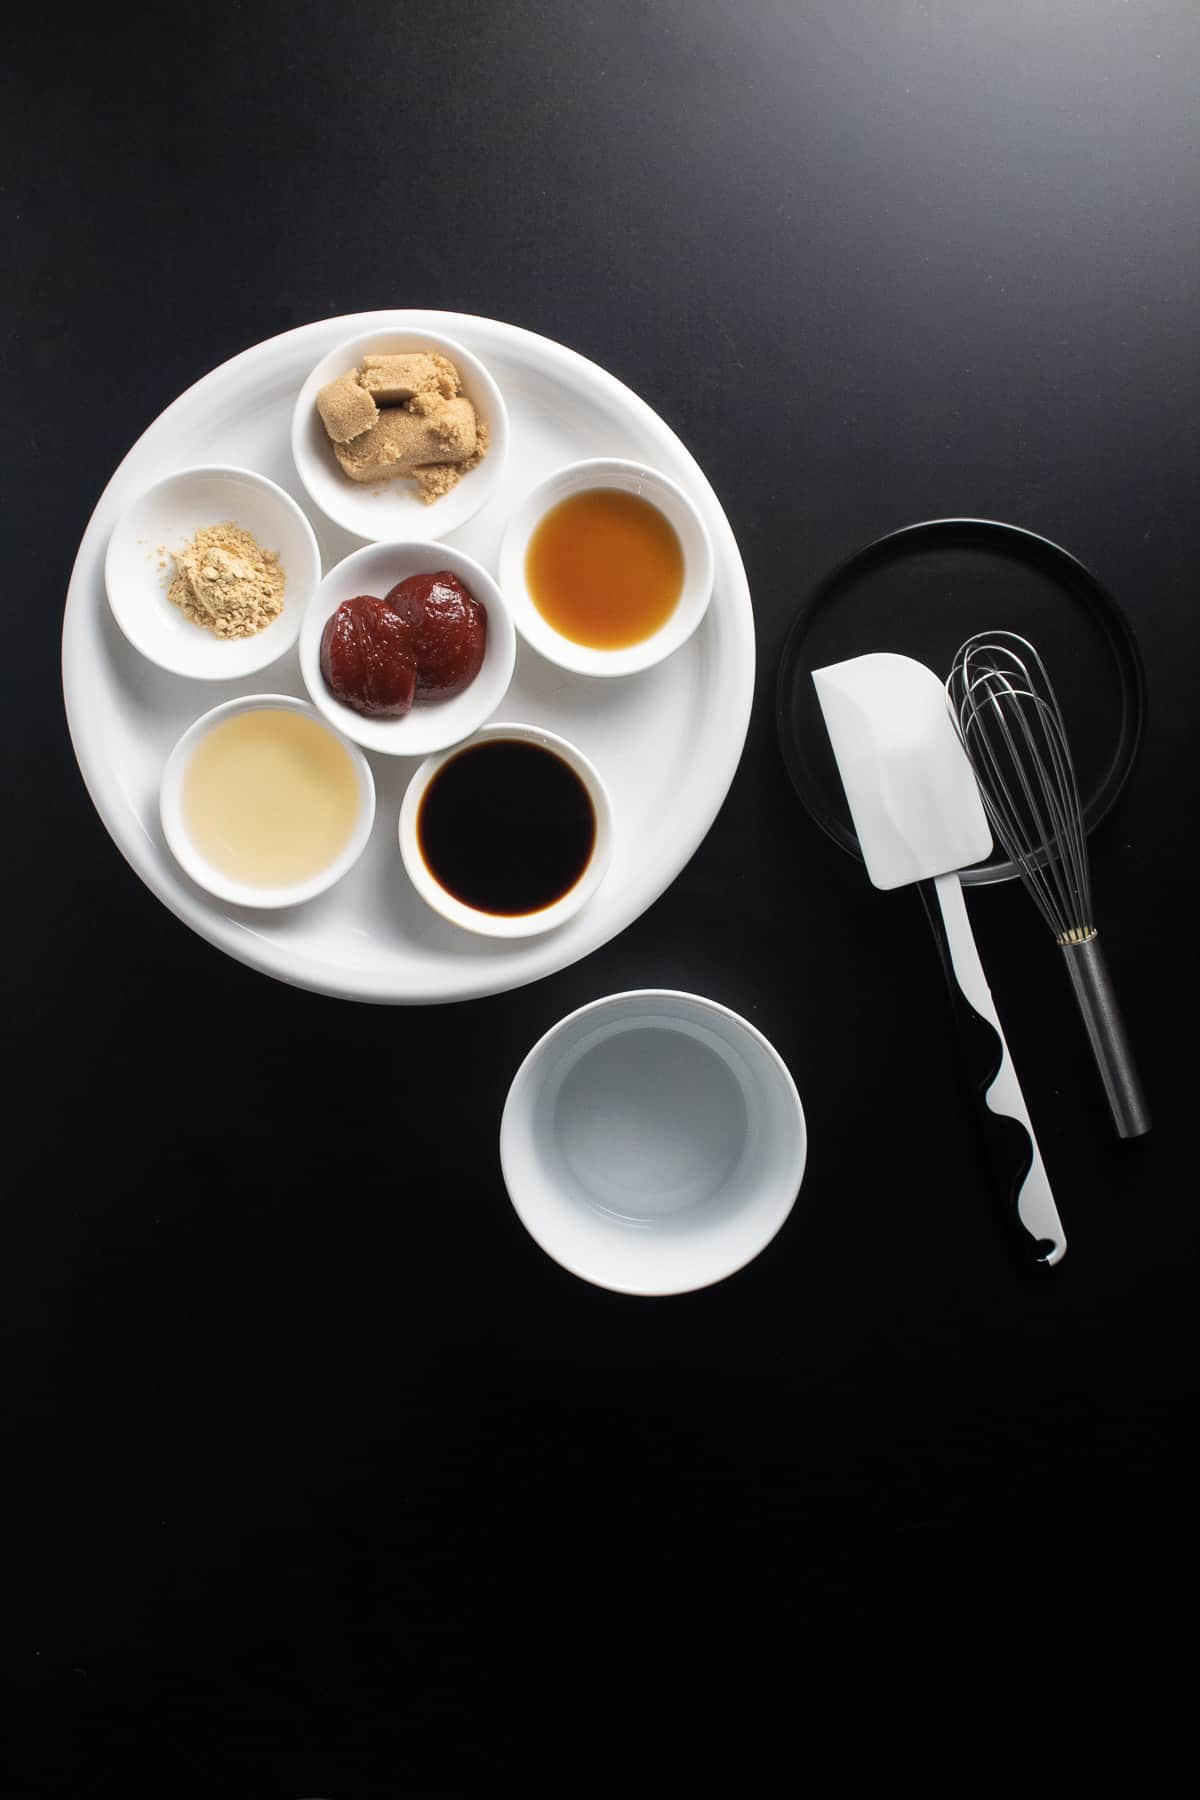 Ingredients for the gochujang sauce are arranged on a white plate on a black surface and next to a spatula, whisk, and small bowl.